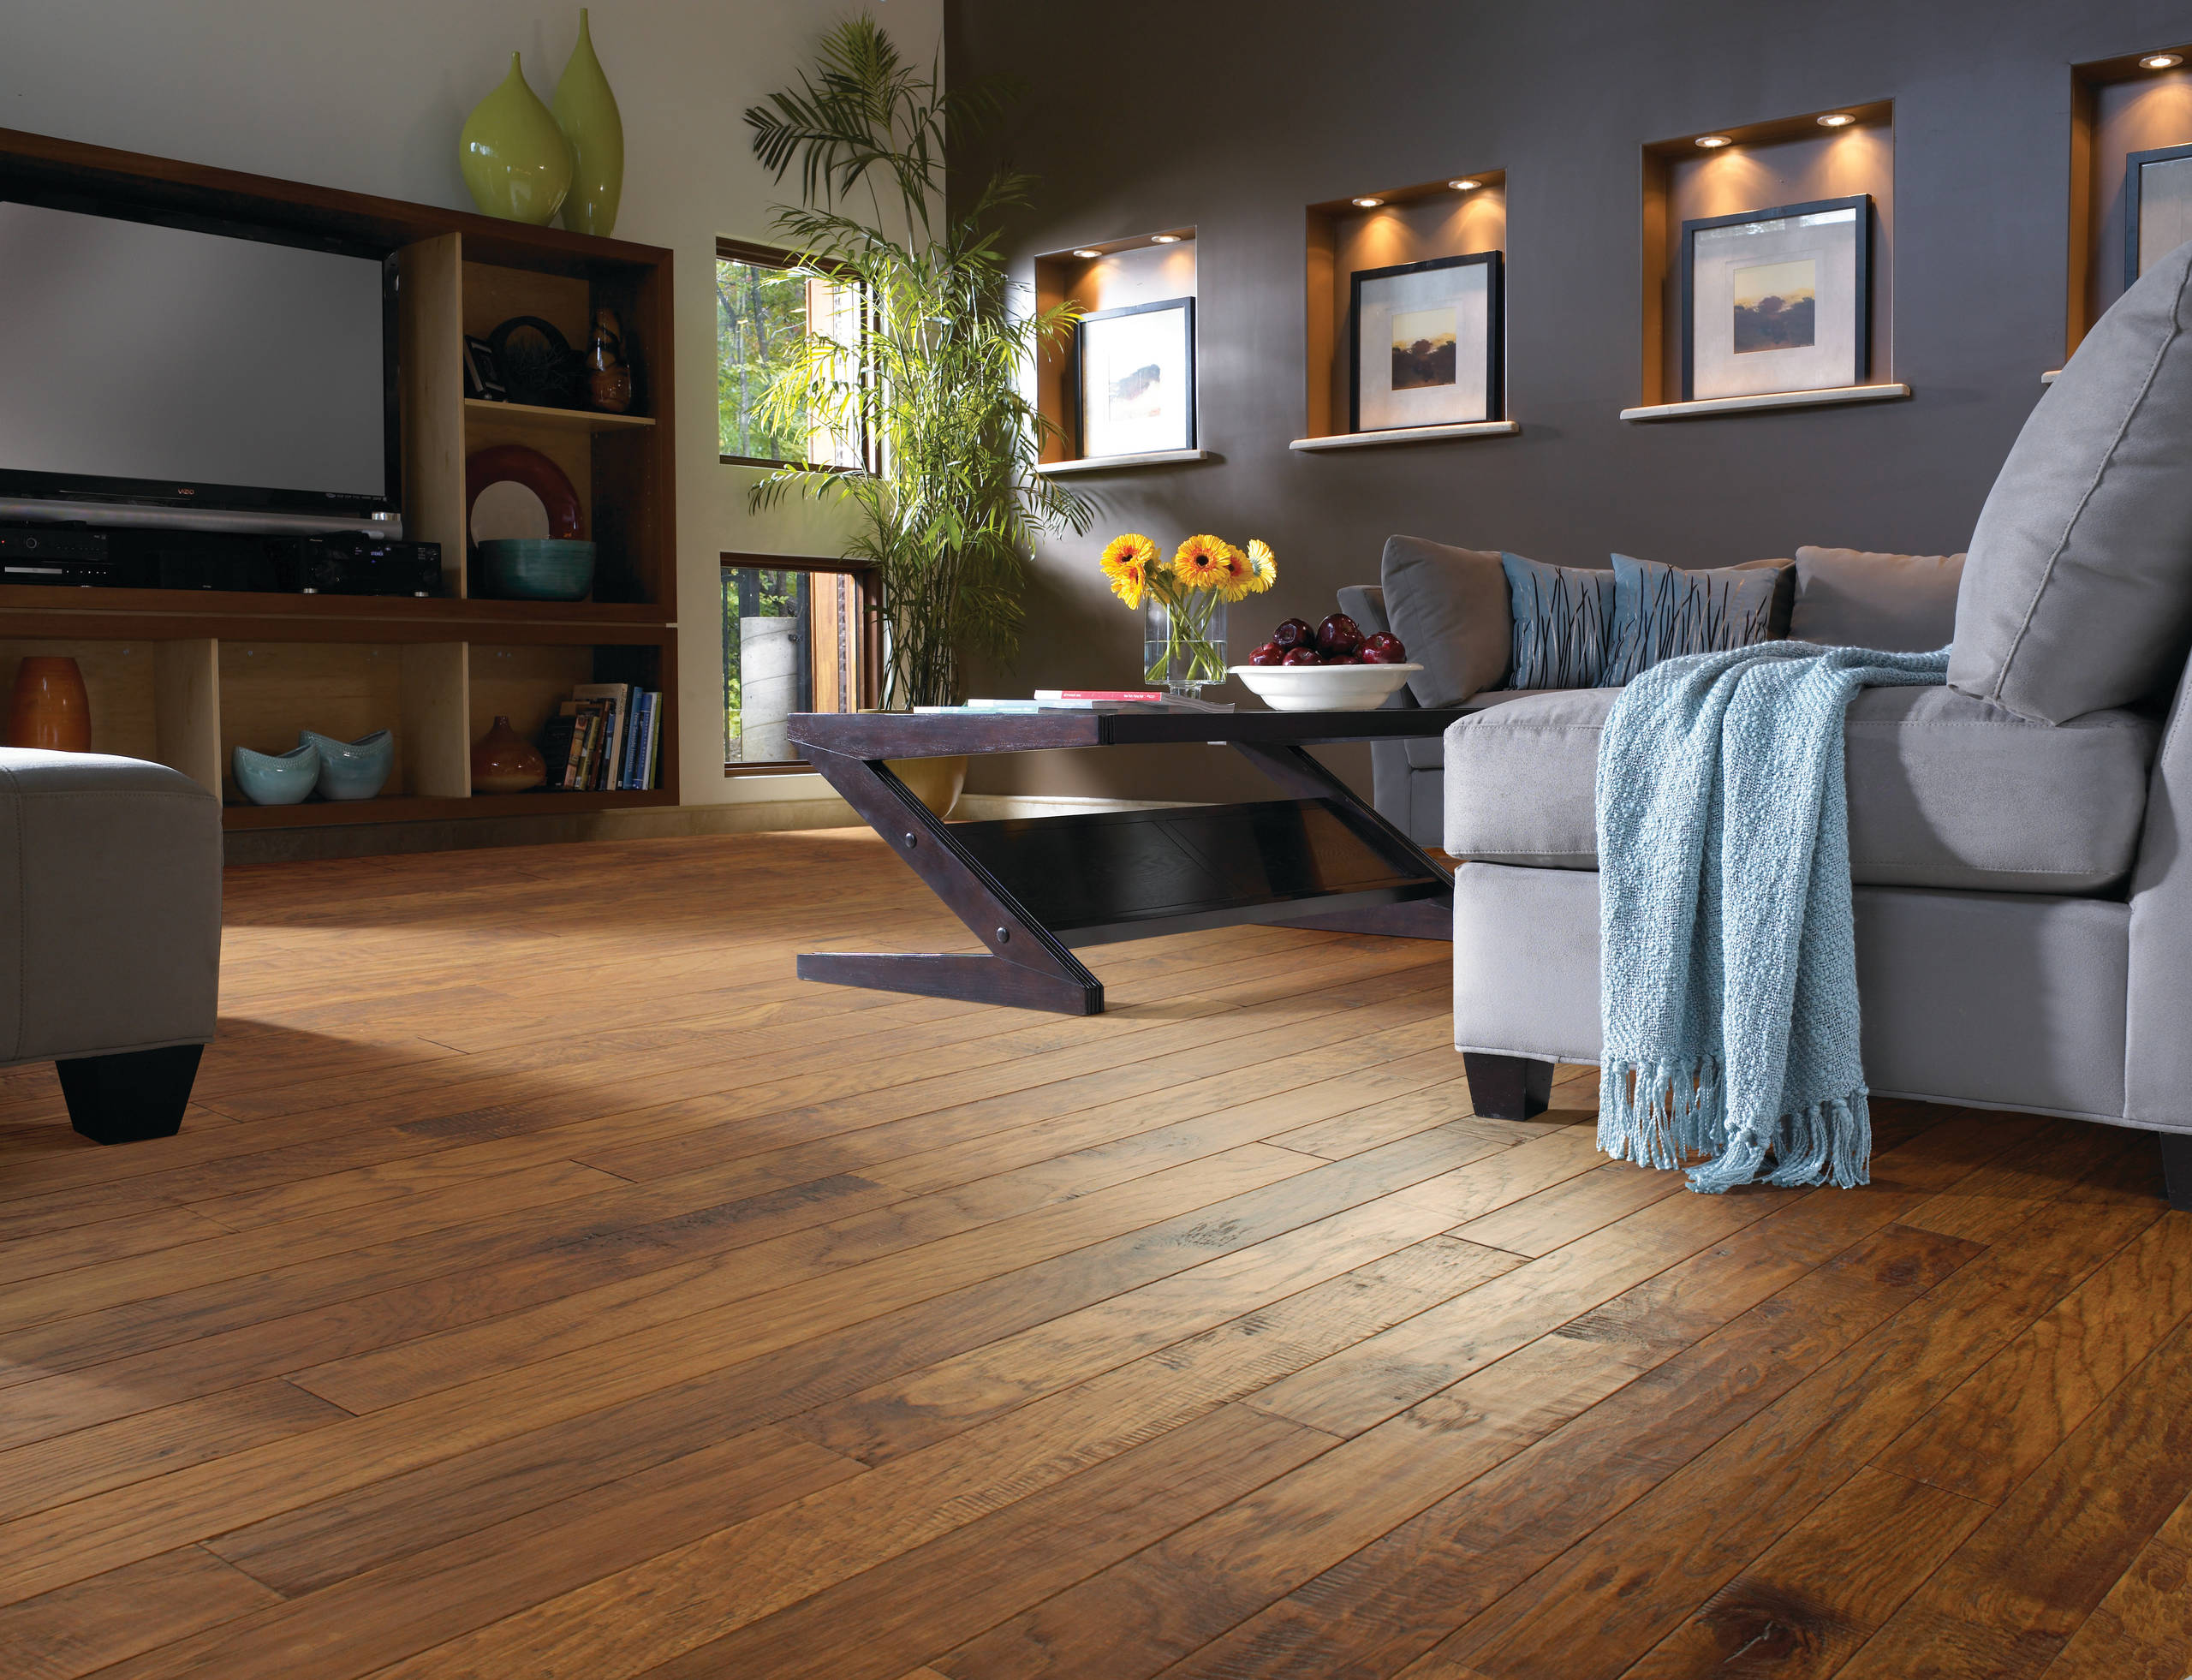 Hickory Wood Floor Living Room, Photos Of Living Rooms With Hardwood Floors